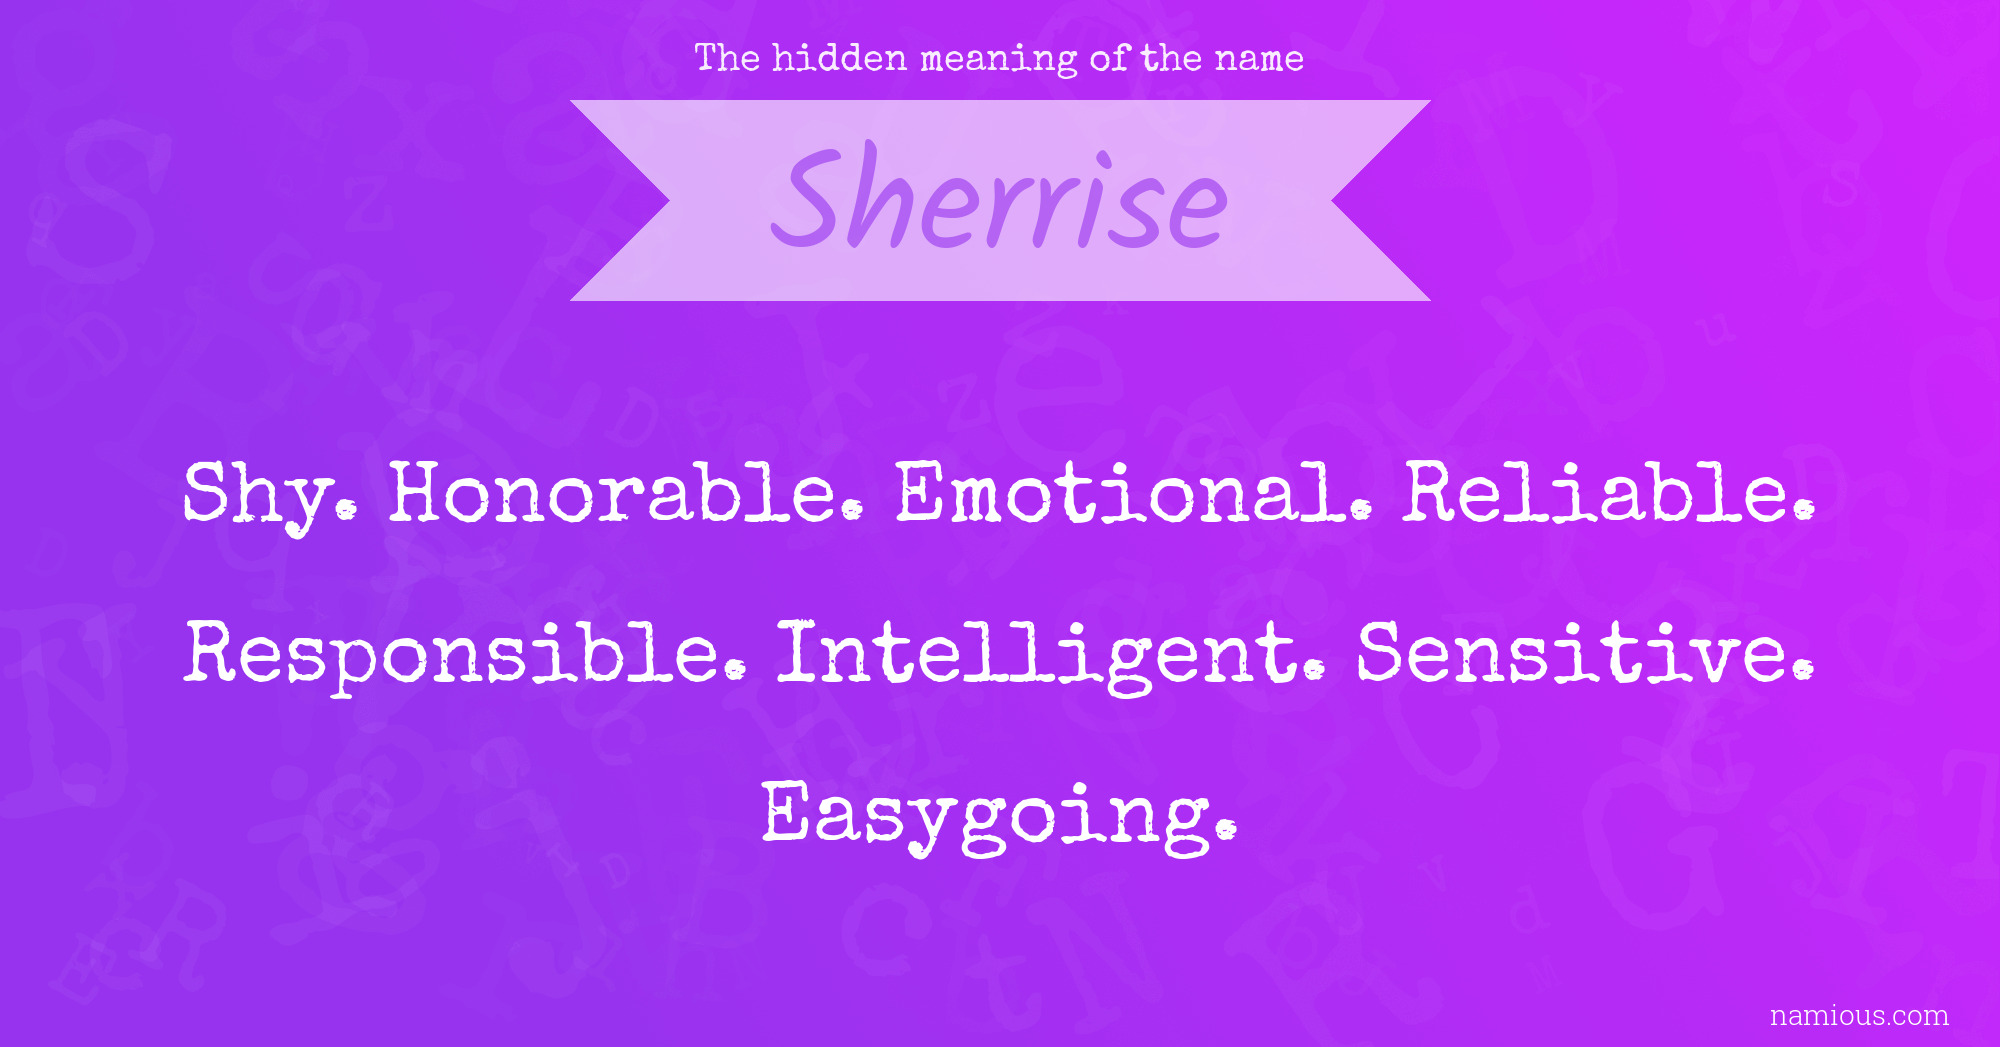 The hidden meaning of the name Sherrise